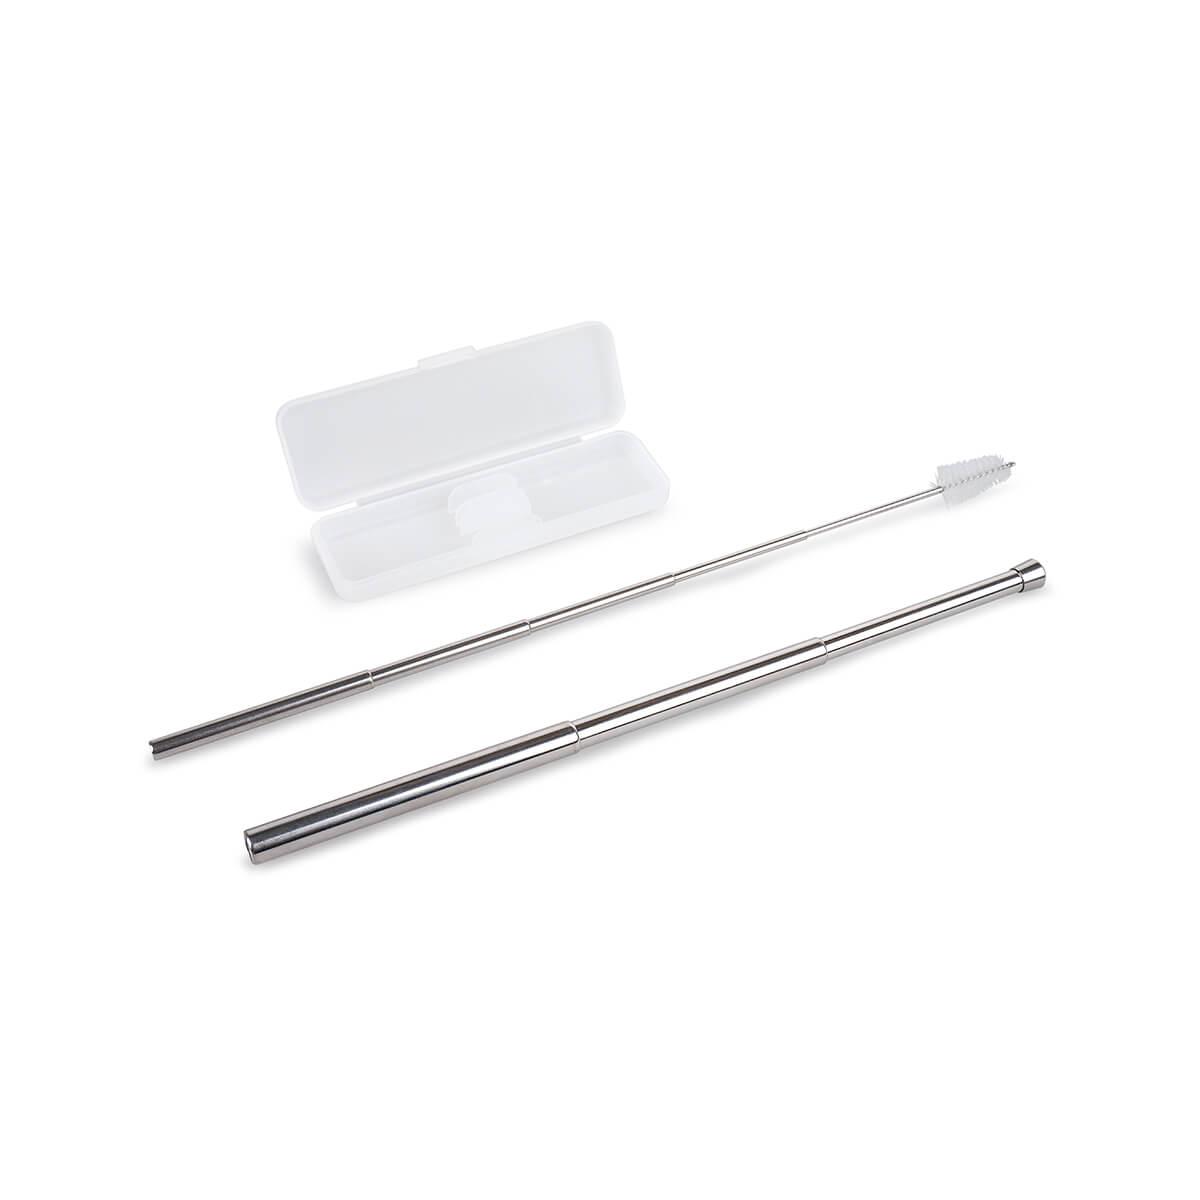  Extendable Stainless Steel Travel Straw Set